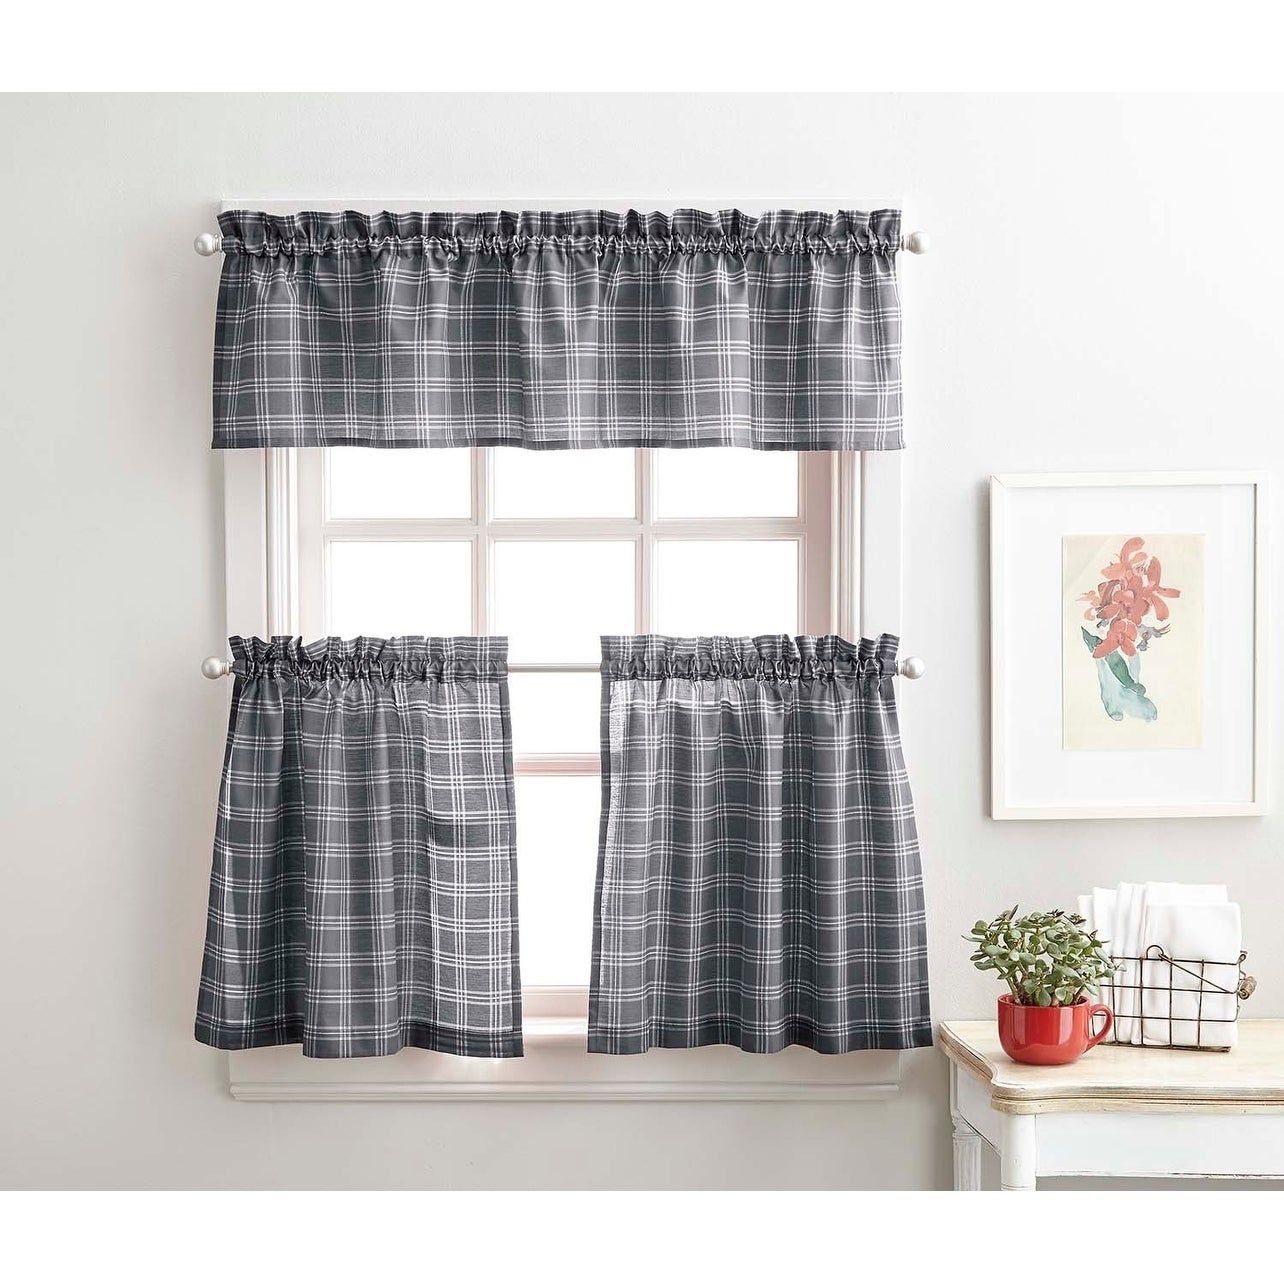 Lodge Plaid 3 Piece Kitchen Curtain Tier And Valance Set – 36" 3pc Set Pertaining To Twill 3 Piece Kitchen Curtain Tier Sets (View 1 of 20)